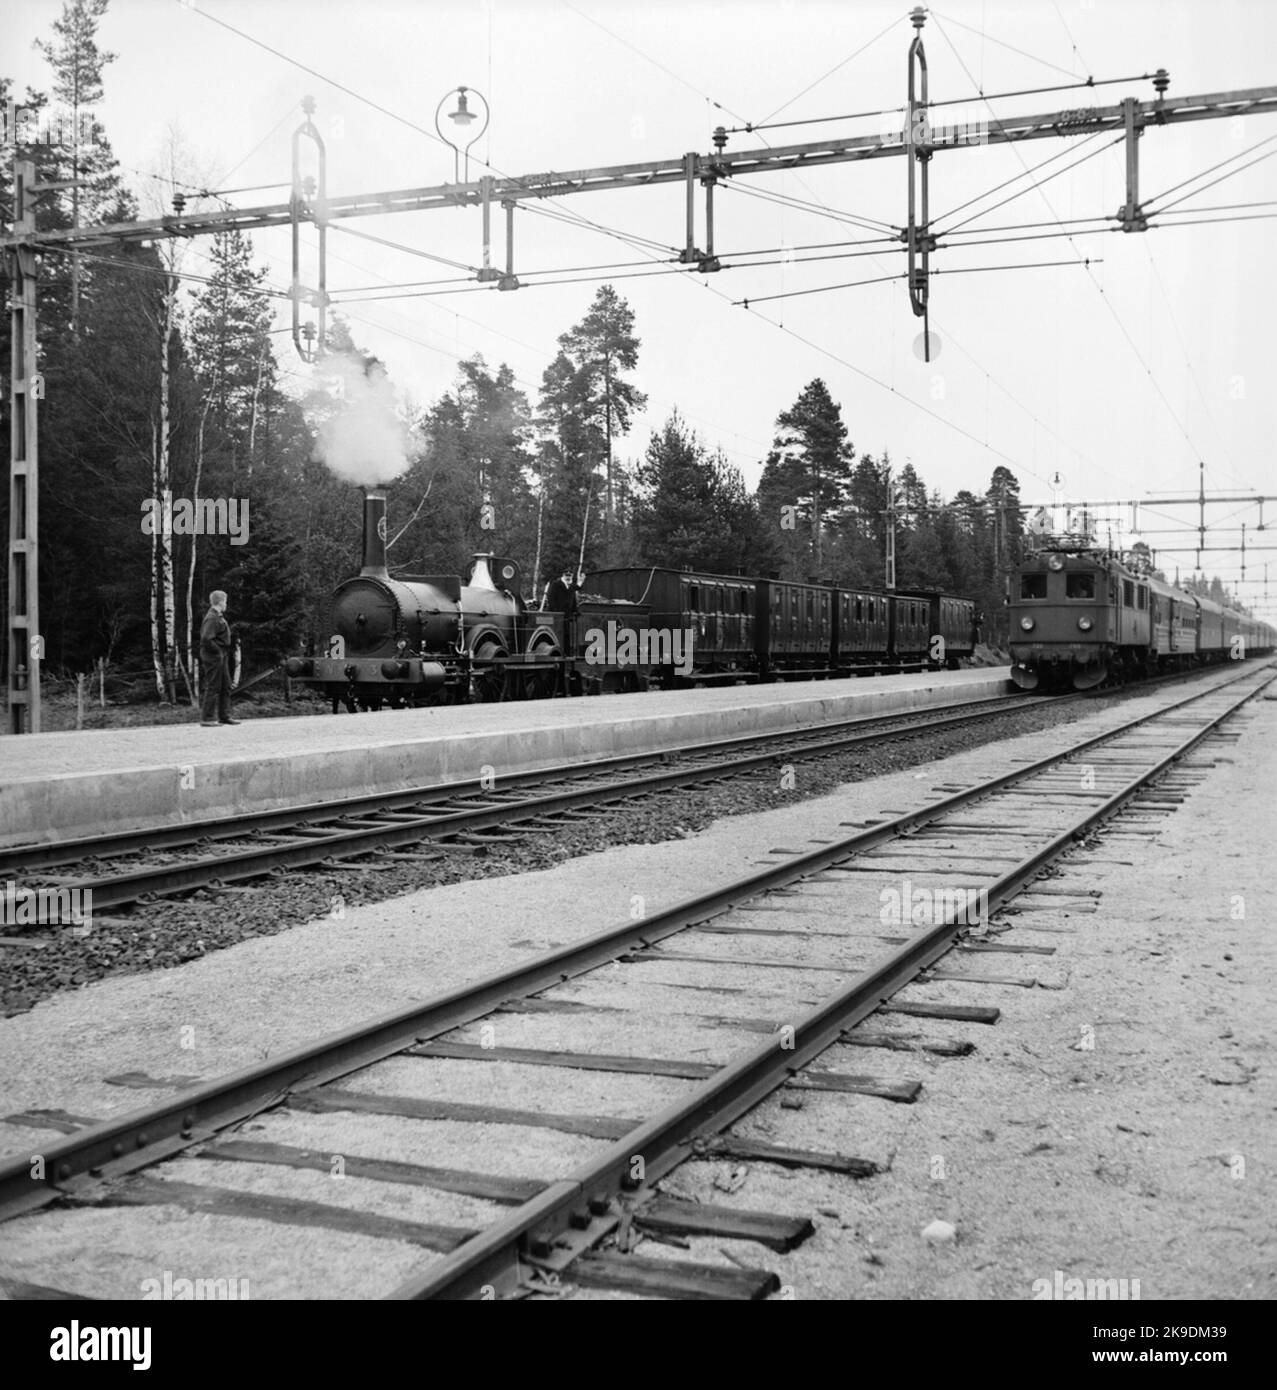 Historical train's journey from Stockholm to Gothenburg for the inauguration of train 62. SJ B 3 'Prince August'. KHJ CD 13. SJ C 182. SJ AB 289. SJ A 103. SJ C2B 329. SJ F 700 Stock Photo